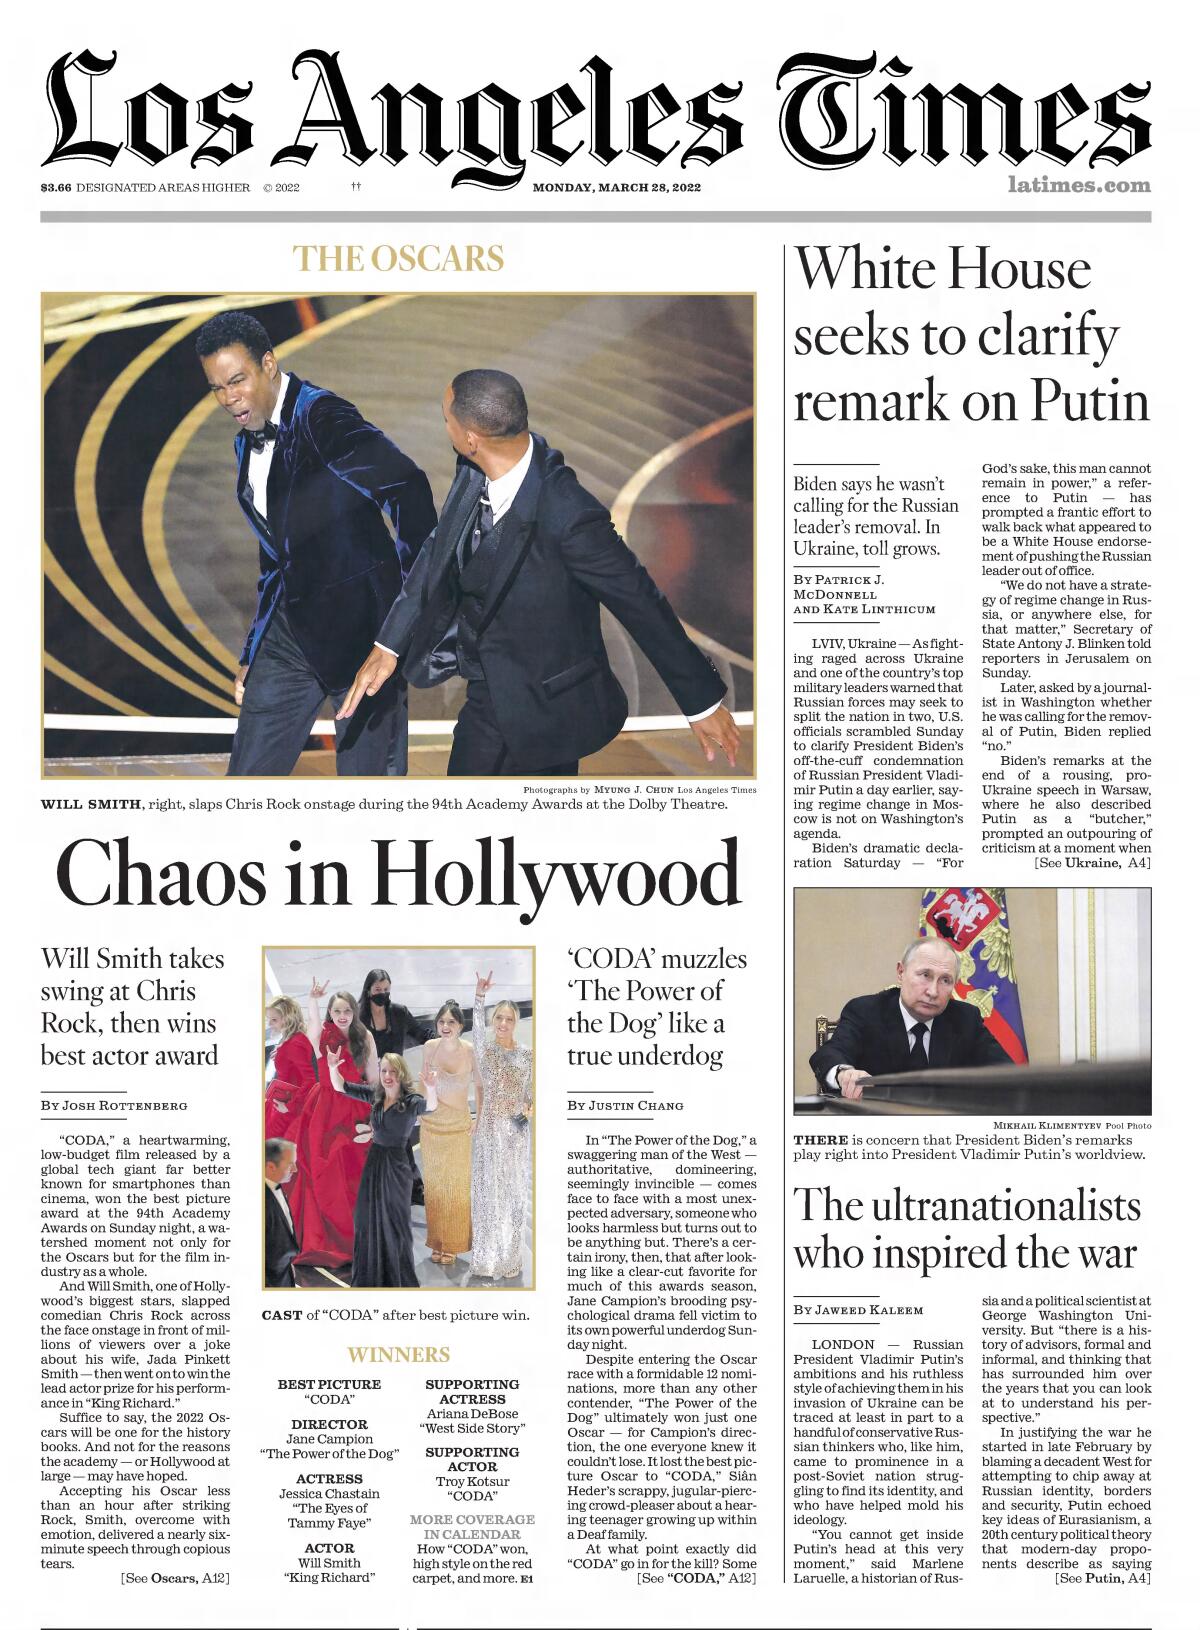 Front page of the Los Angeles Times depicting Will Smith taking a swing at Chris Rock at the Oscars